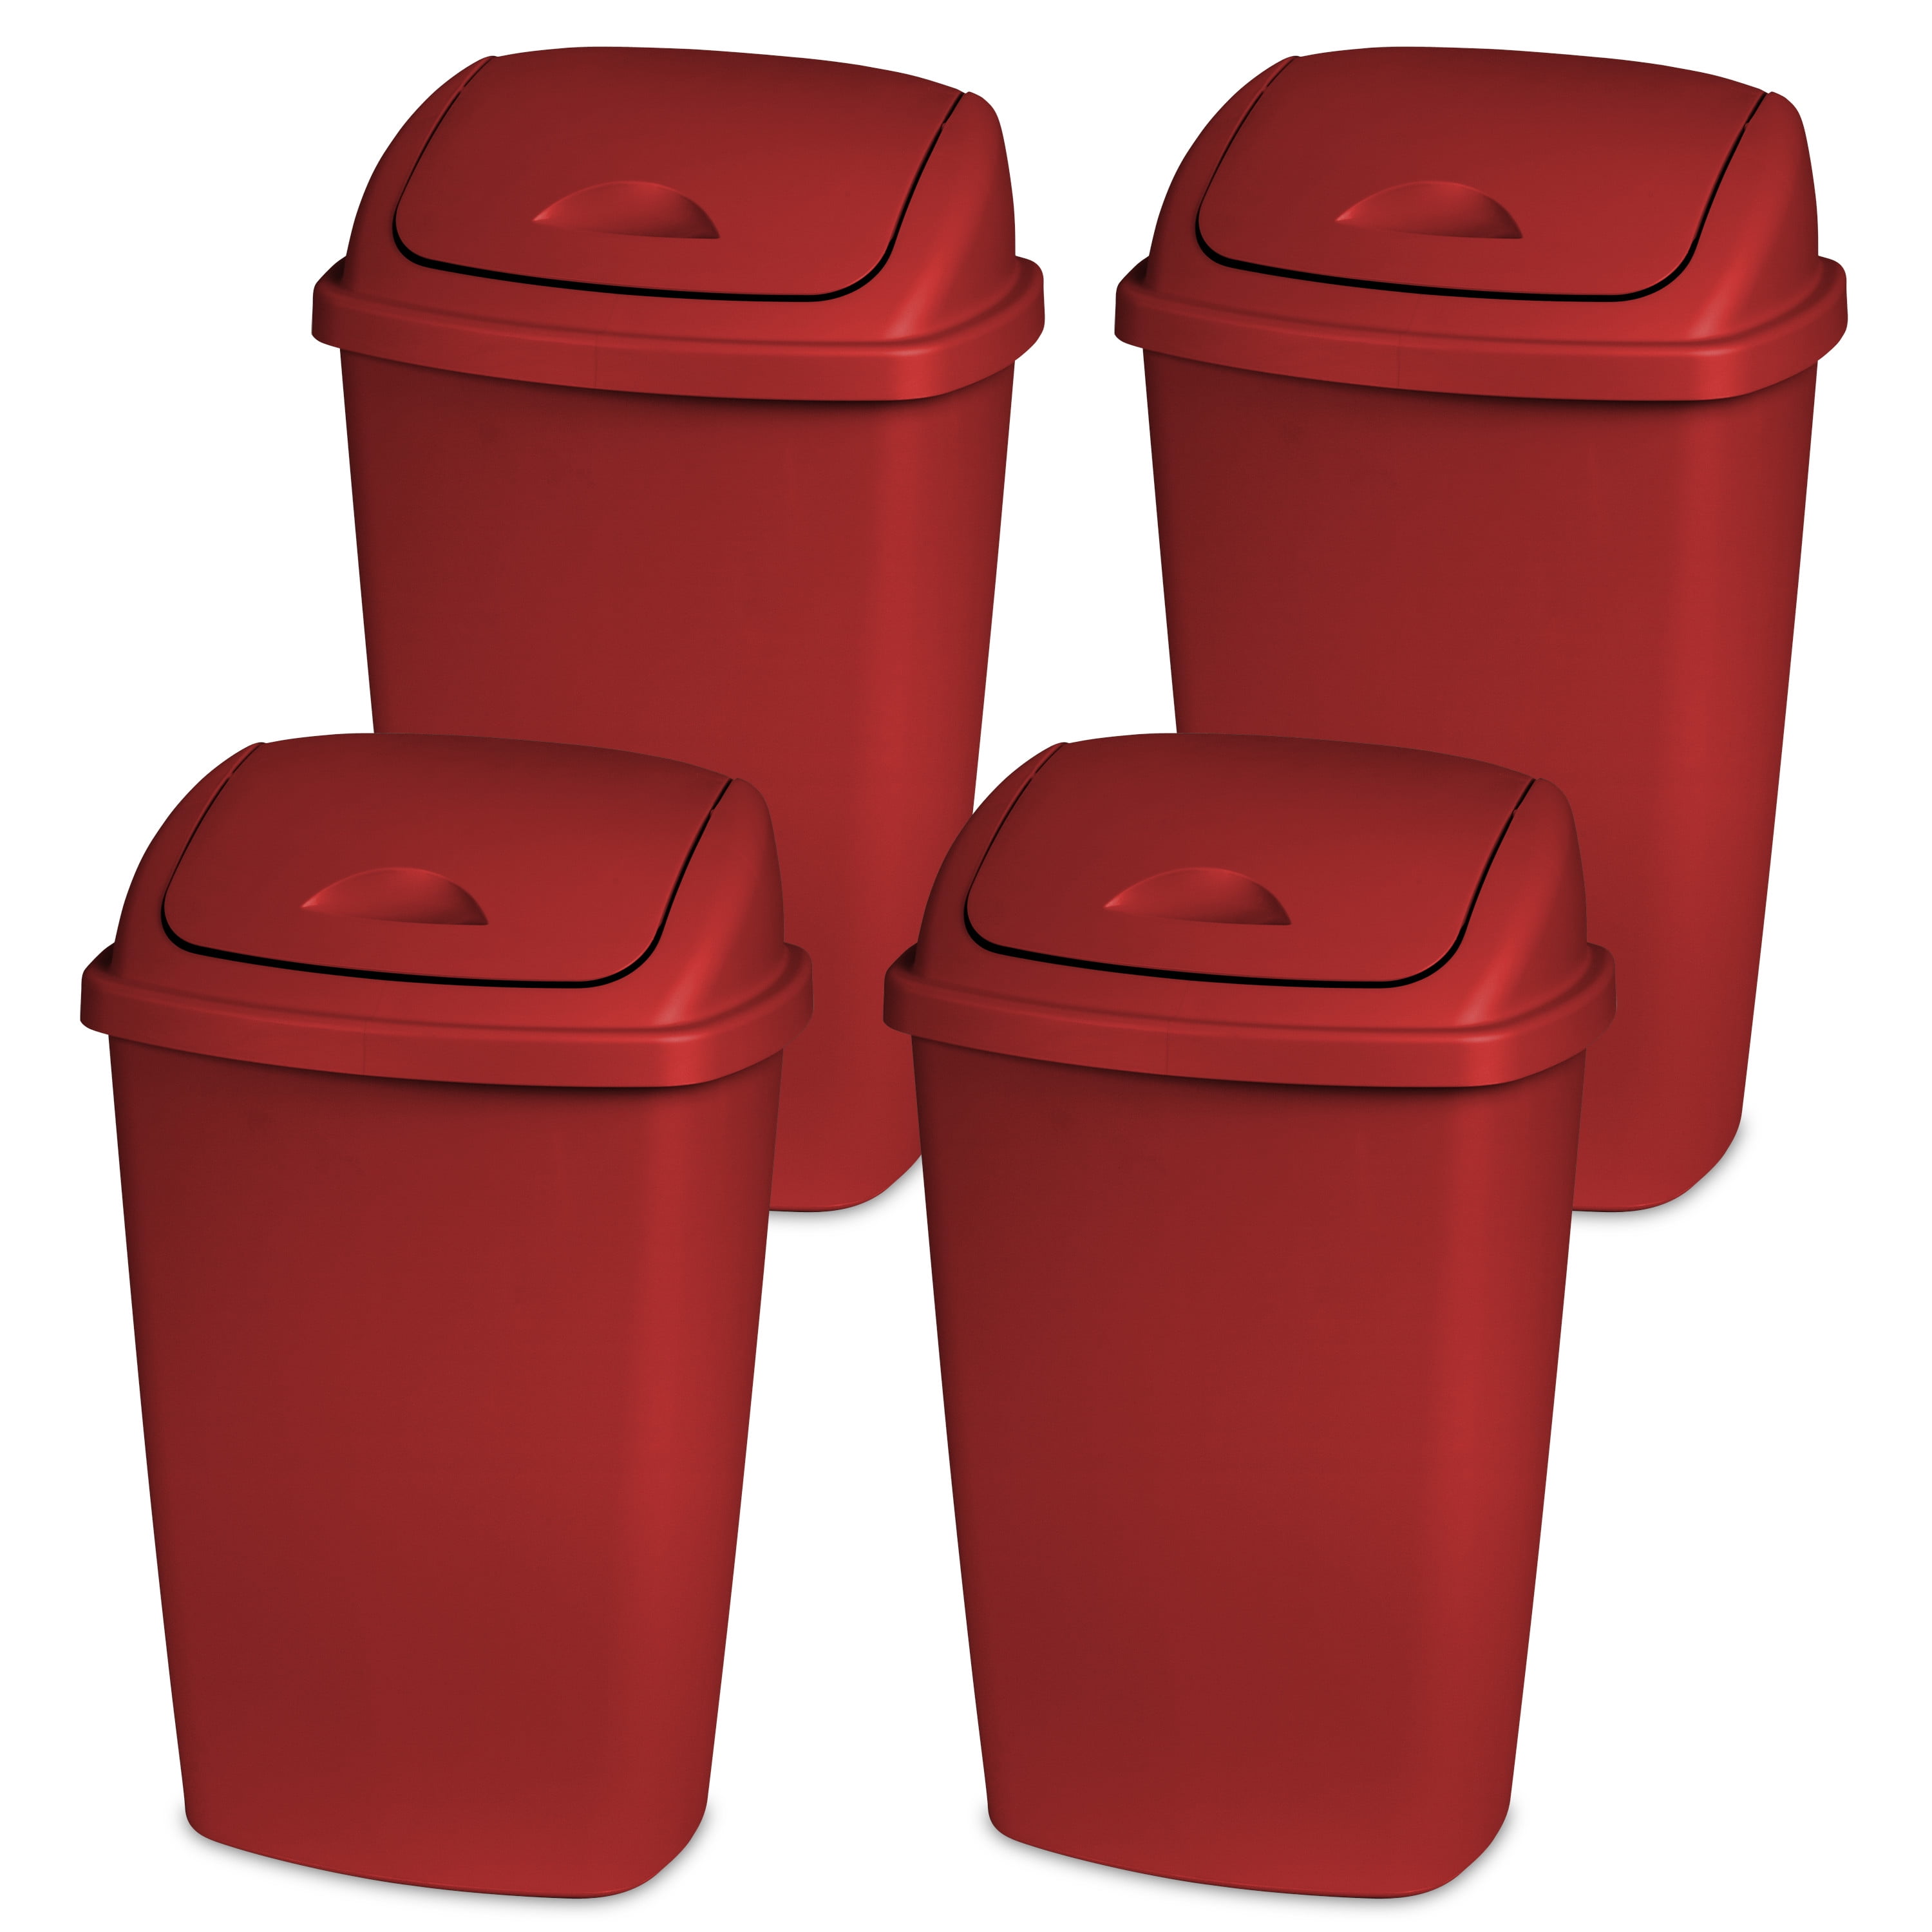 ColorLife 2.2 Gallons Plastic Trash Can